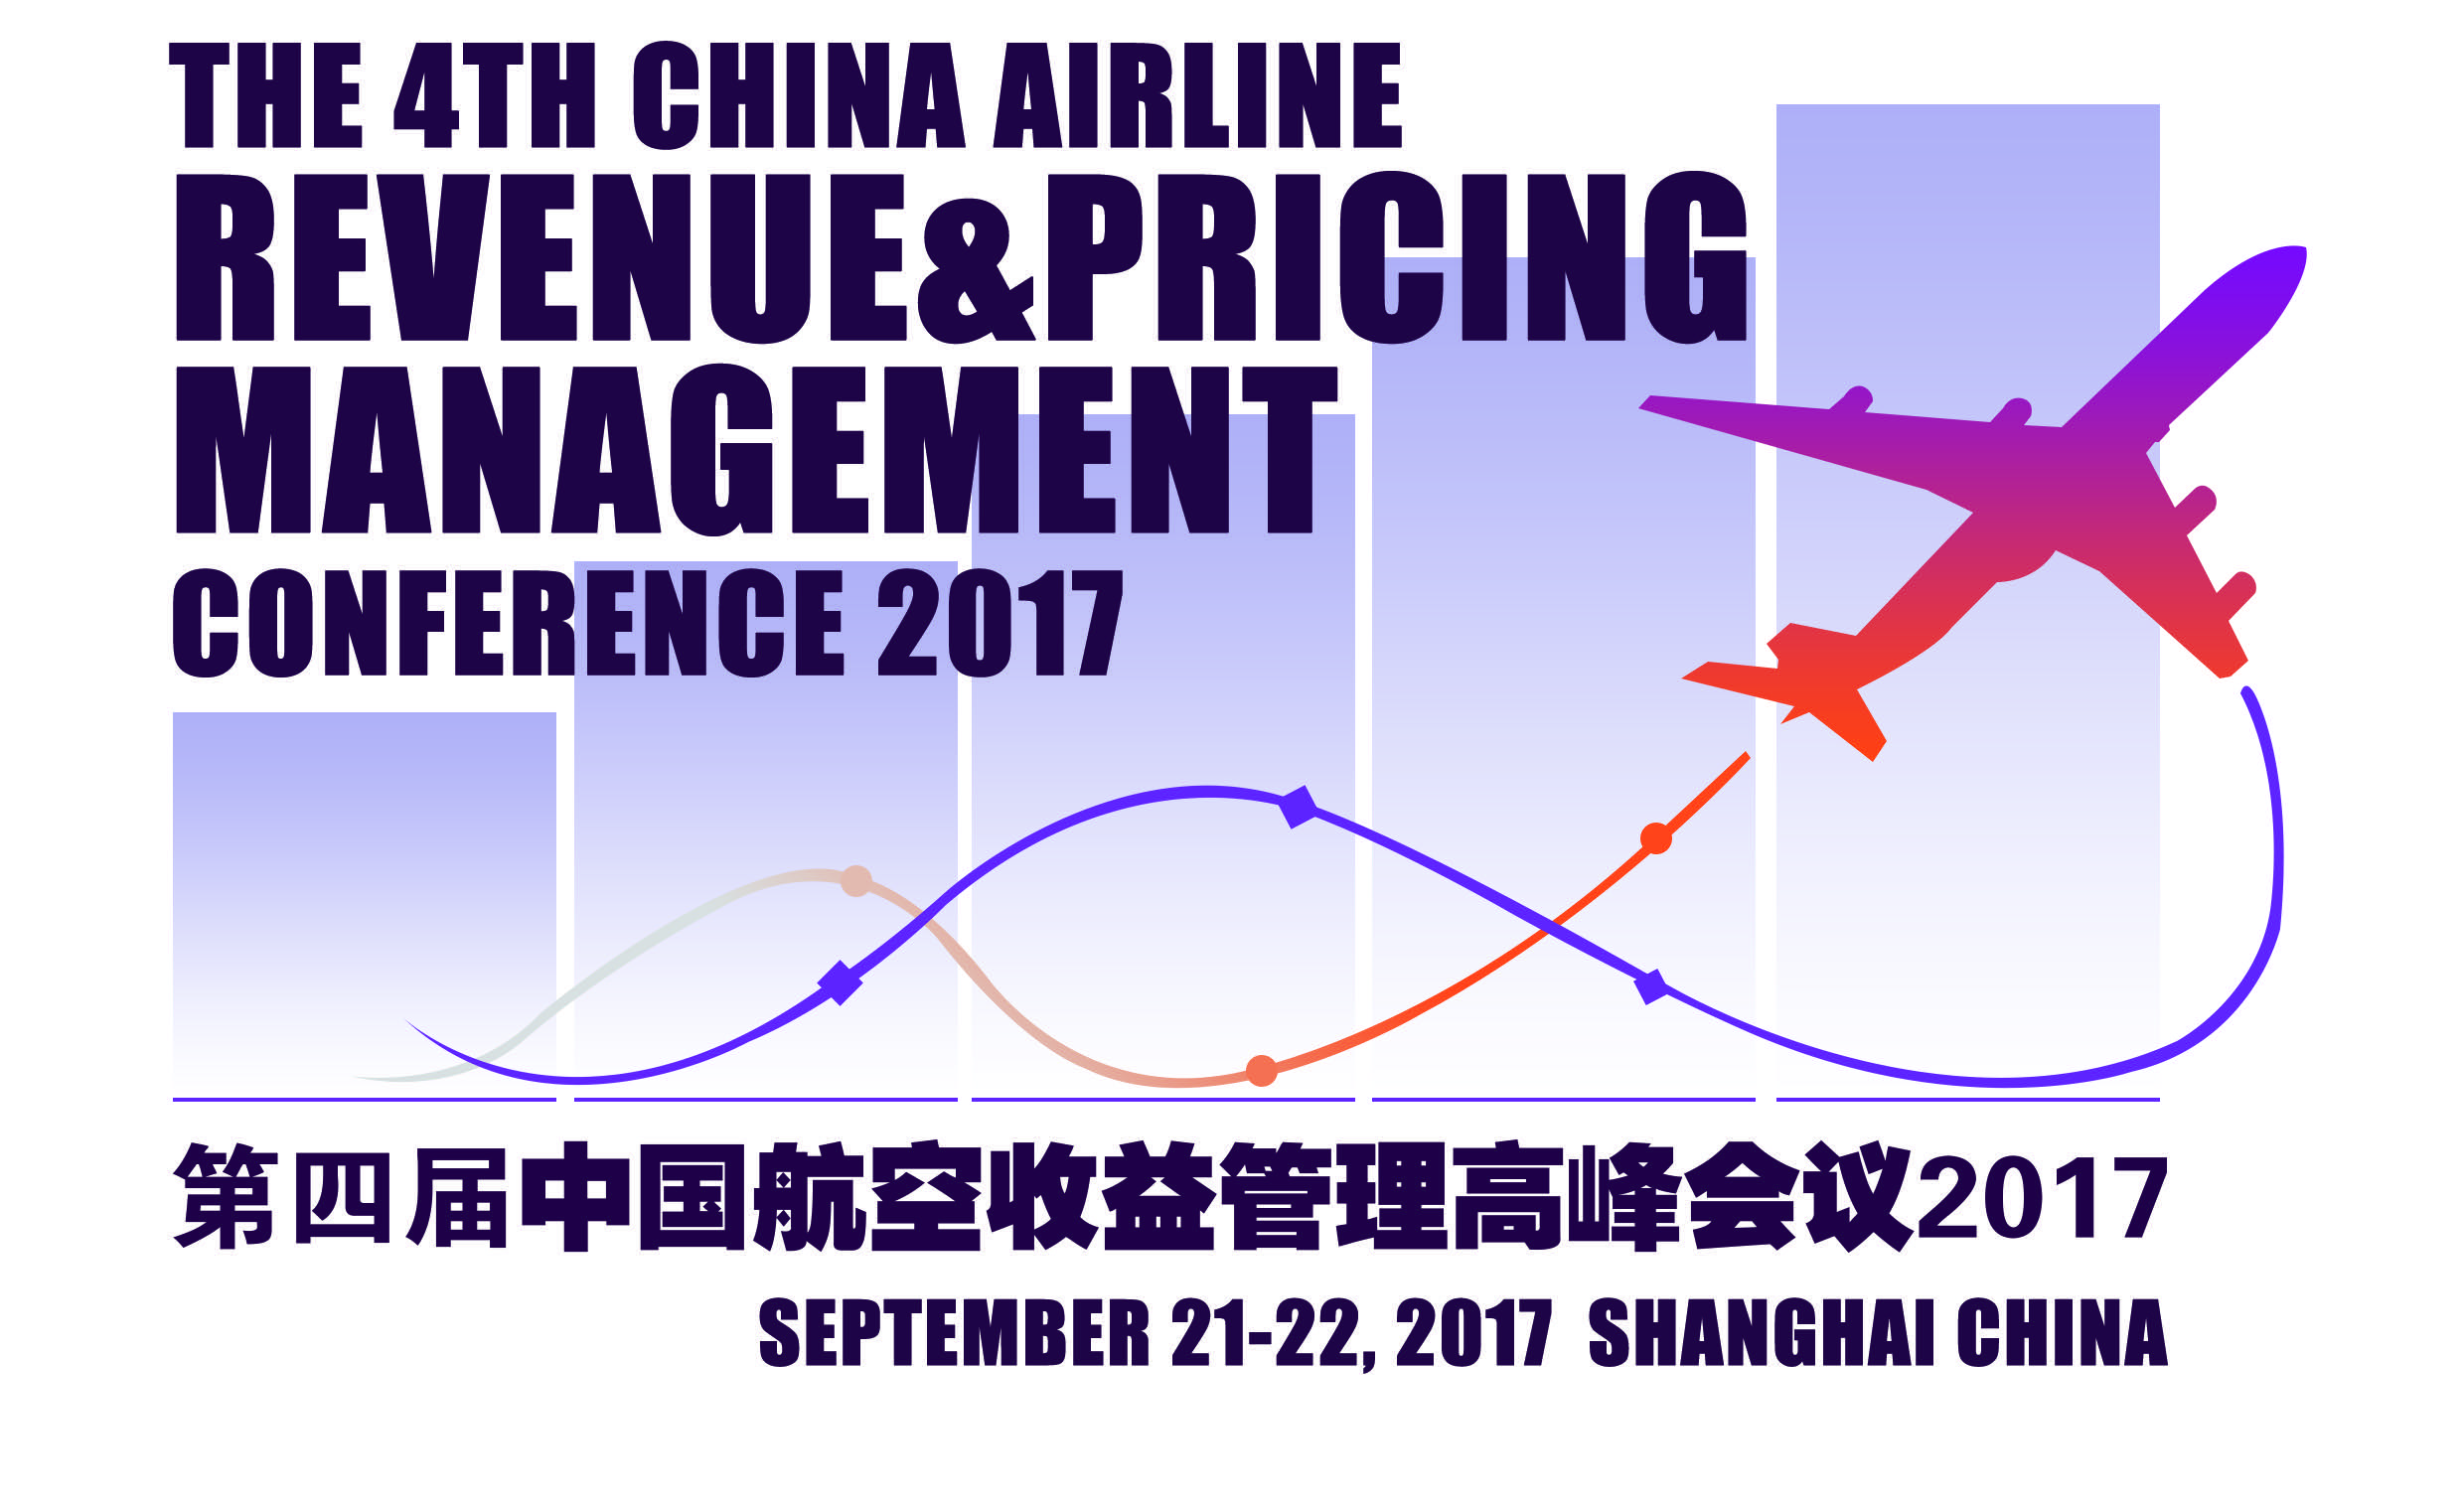 The 4th China Airline Revenue & Pricing Management Conference 2017